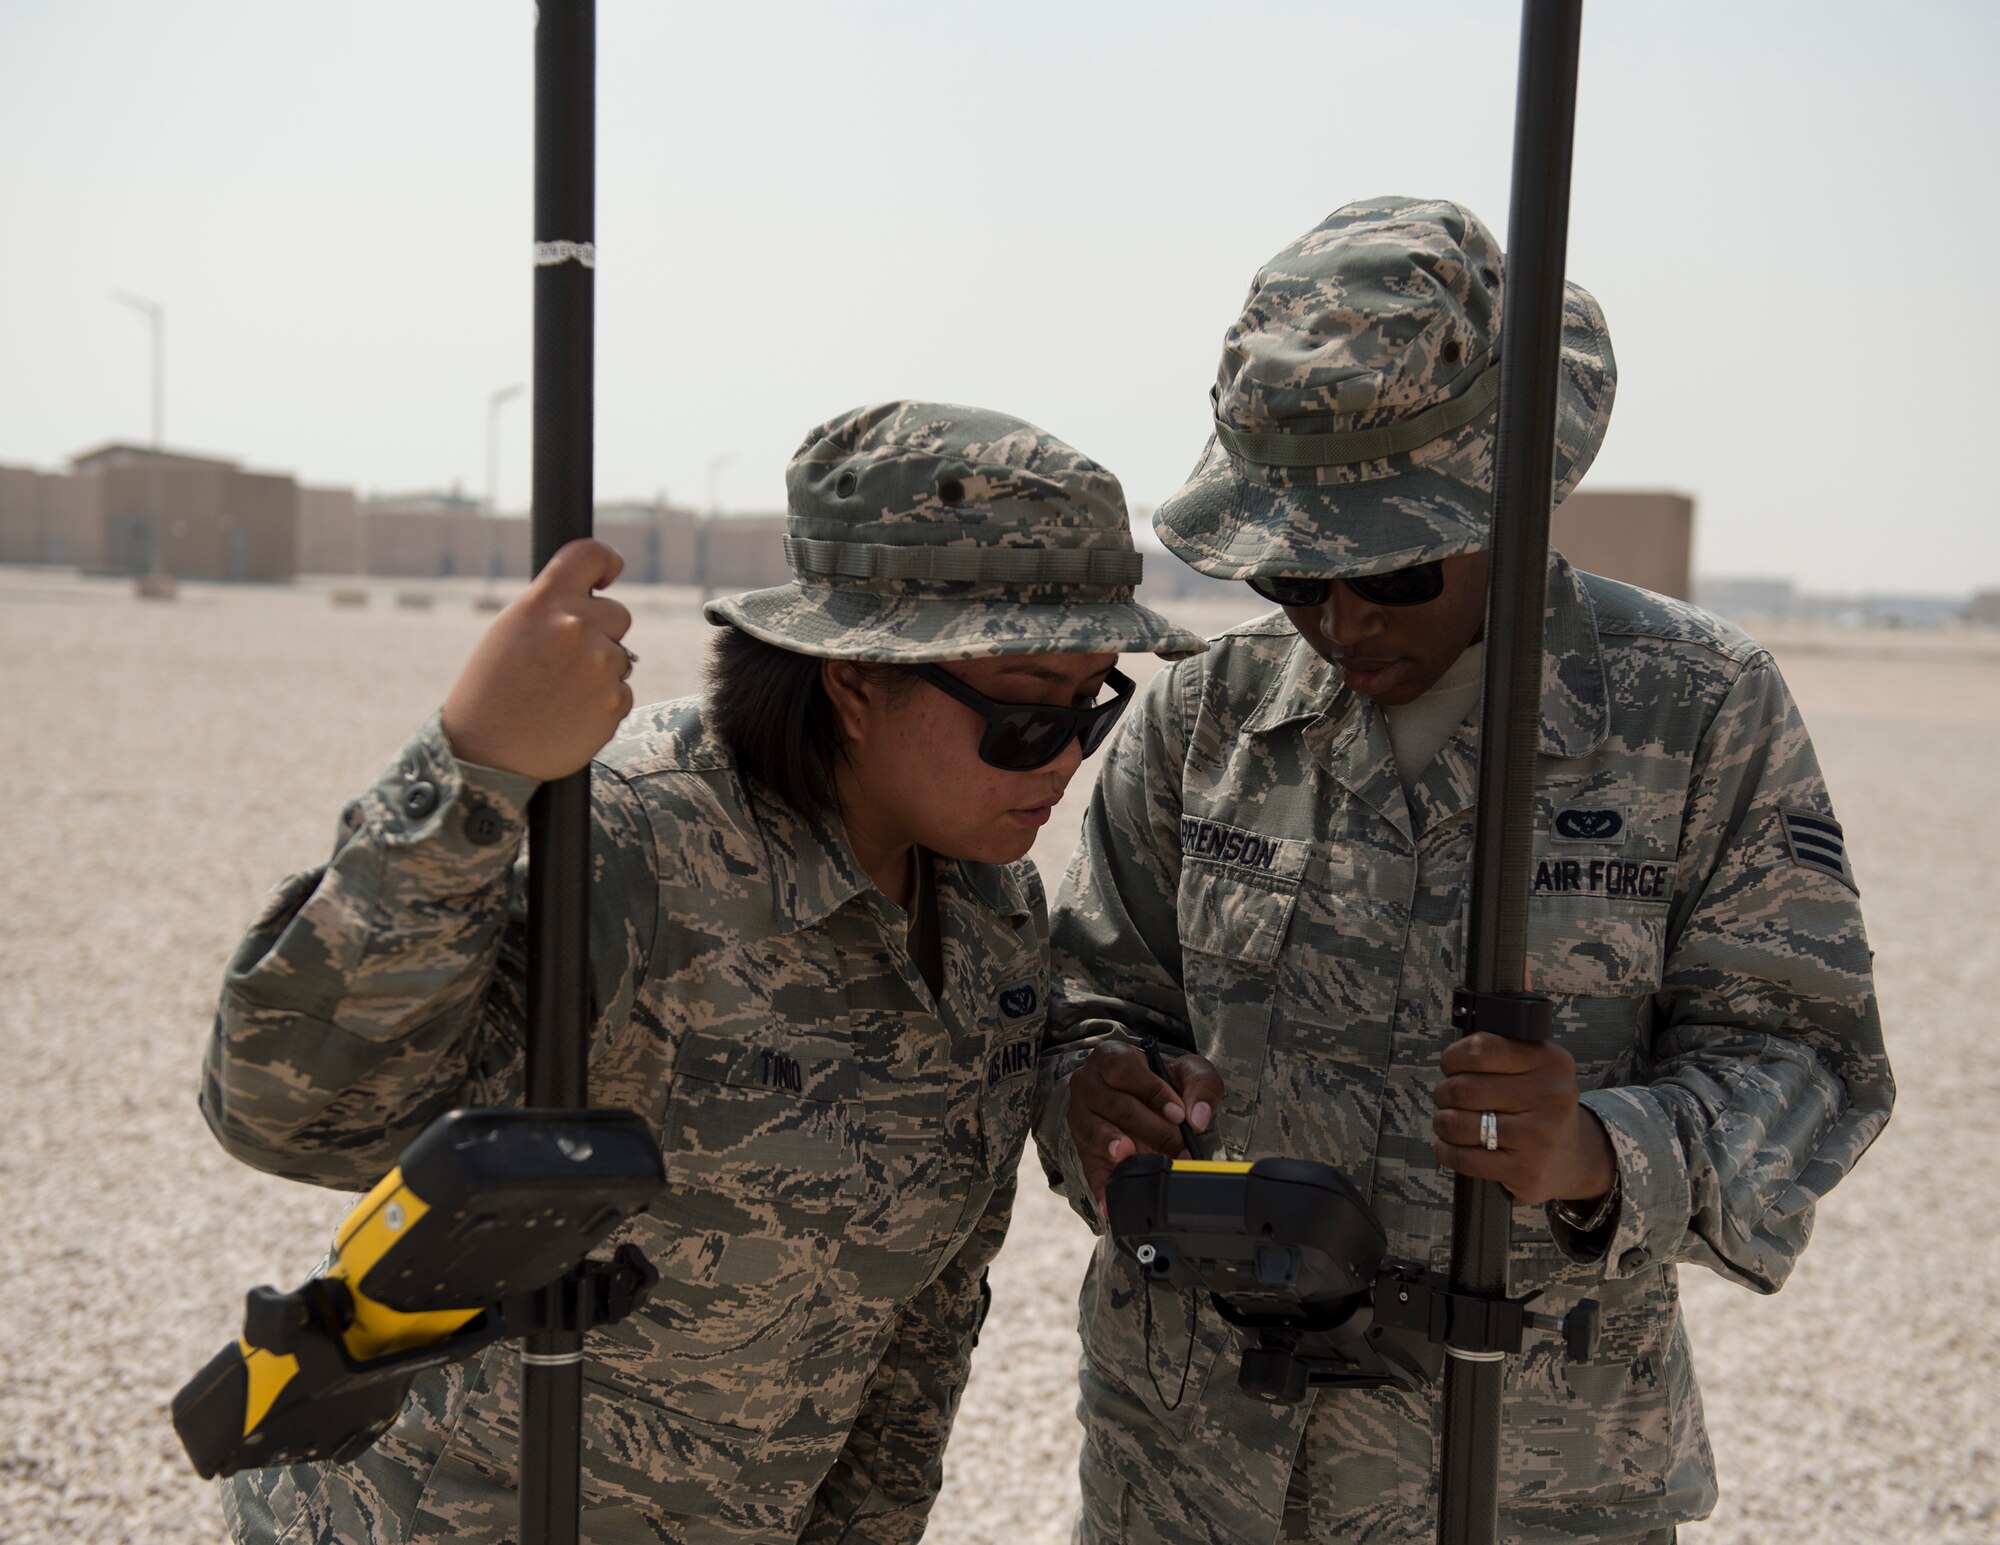 U.S Air Force Senior Airman Zamantha Tinio, left, an expeditionary geobase manager and Senior Airman Dalicia Brenson, an engineering technician with the 379th Expeditionary Civil Engineer Squadron, review the coordinates and elevations on the Trimble GPS Land Surveying Equipment at Al Udeid Air Base, Qatar, Aug. 2, 2017.